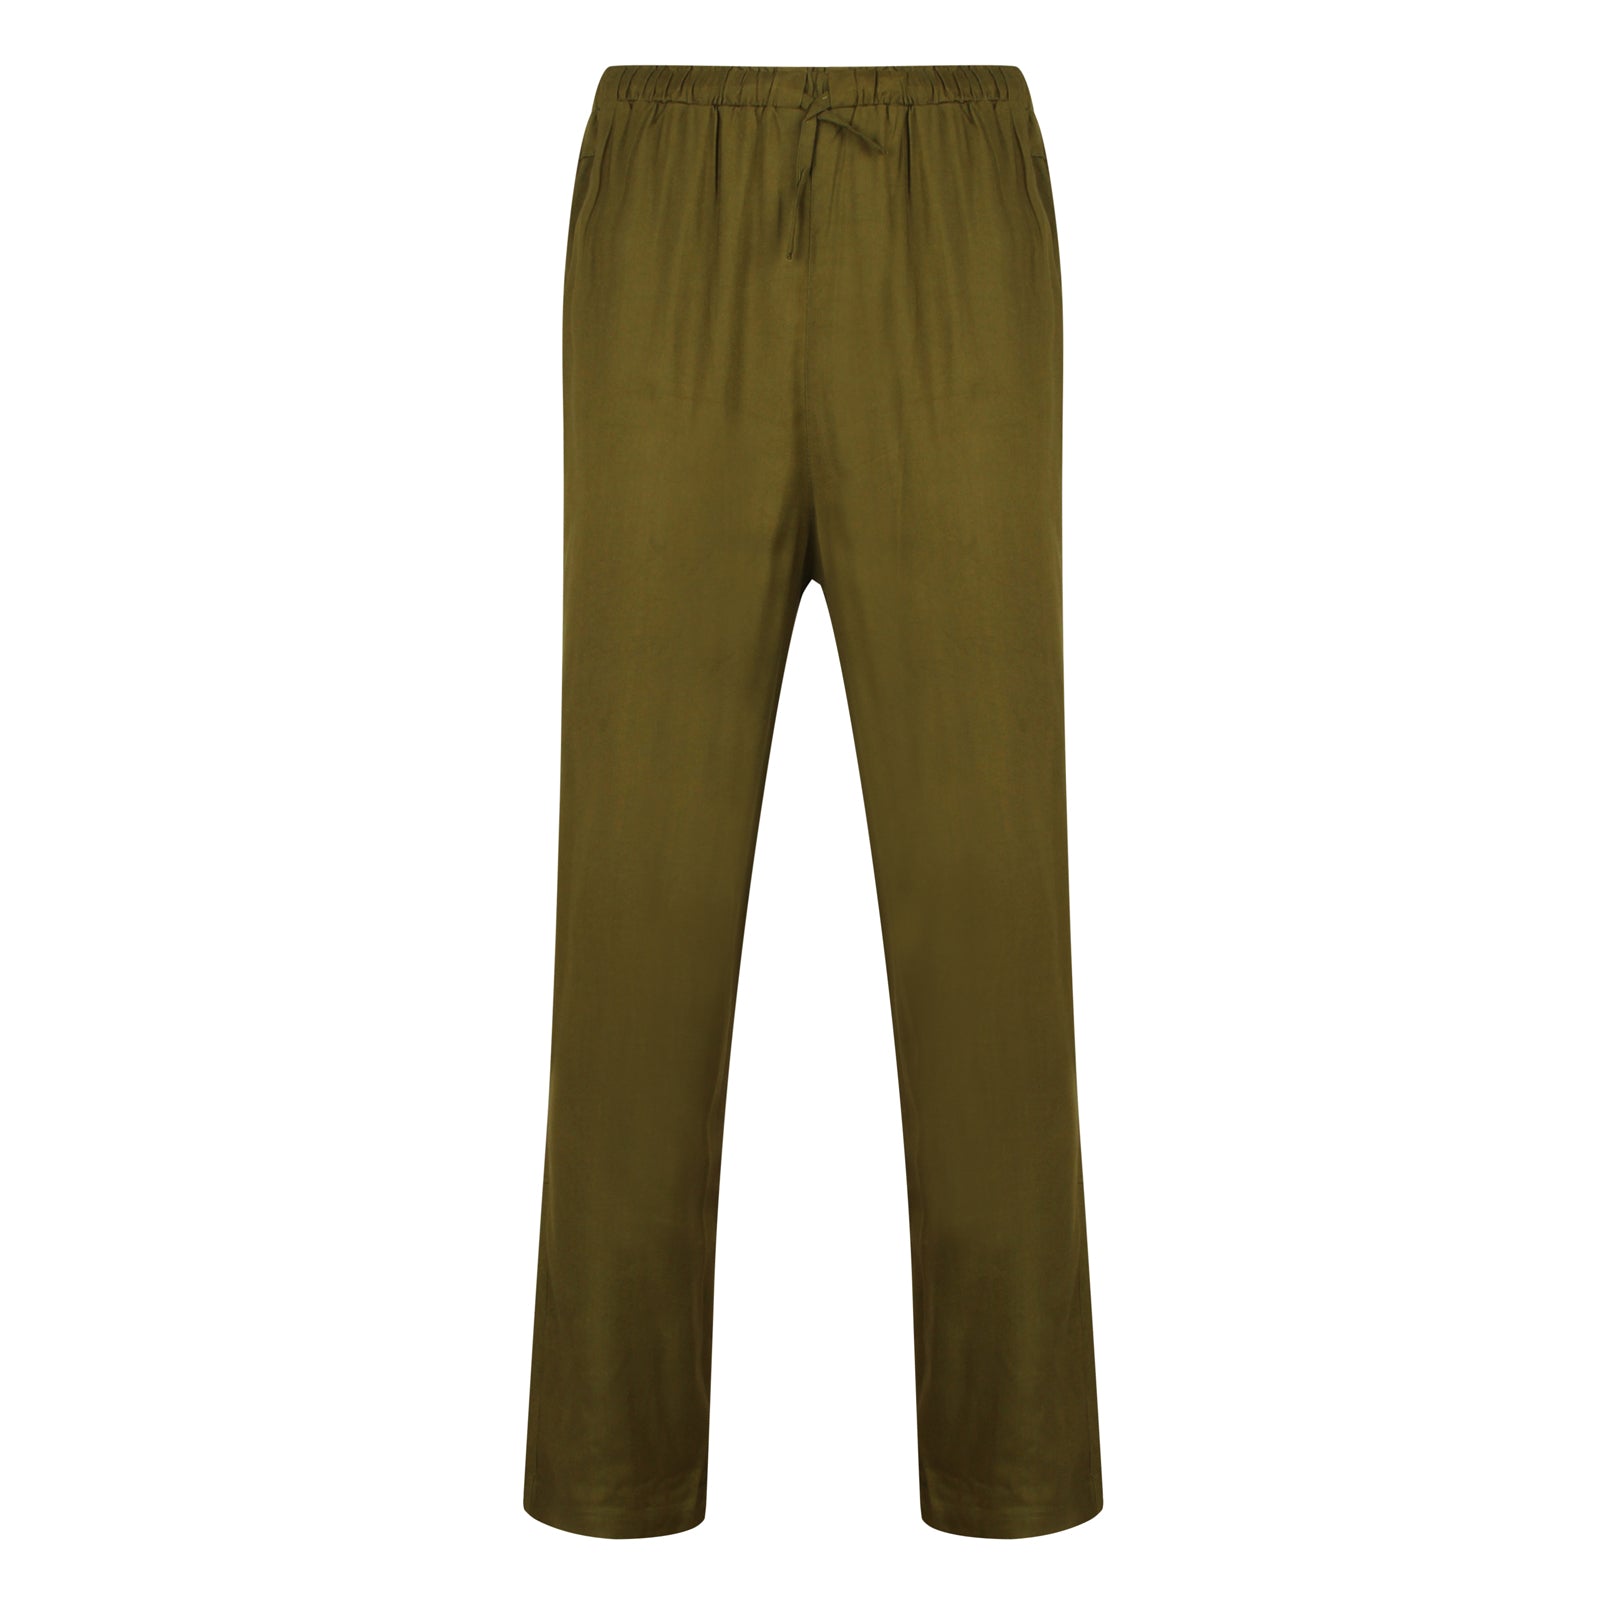 Bamboo Lounge Trousers Green - Natural Clothes Bamboo Clothing & Accessories for Men & Women 